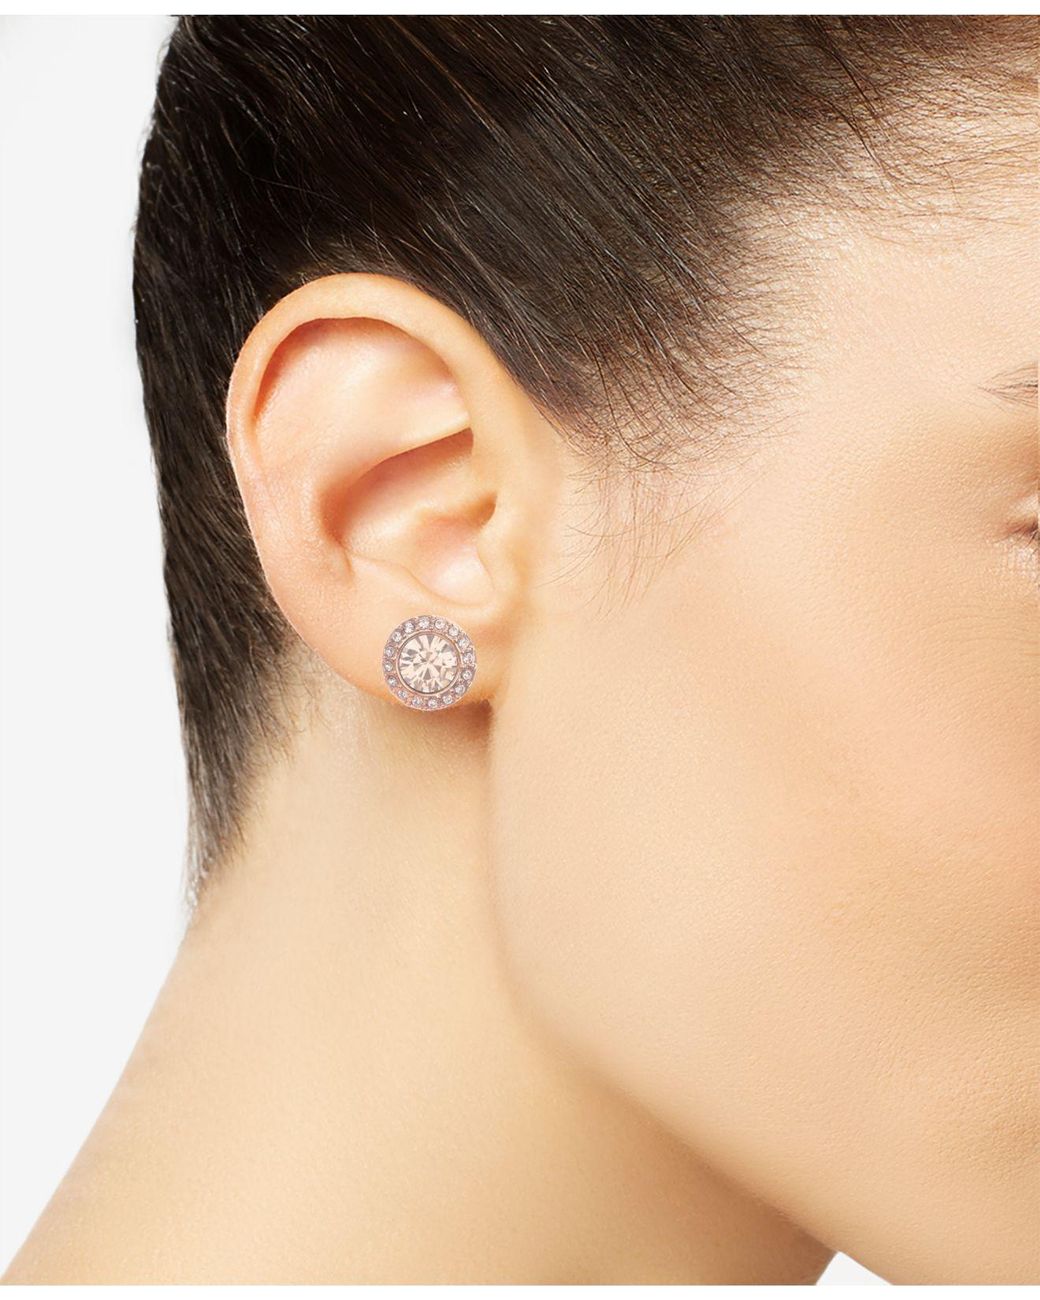 givenchy rose gold earrings